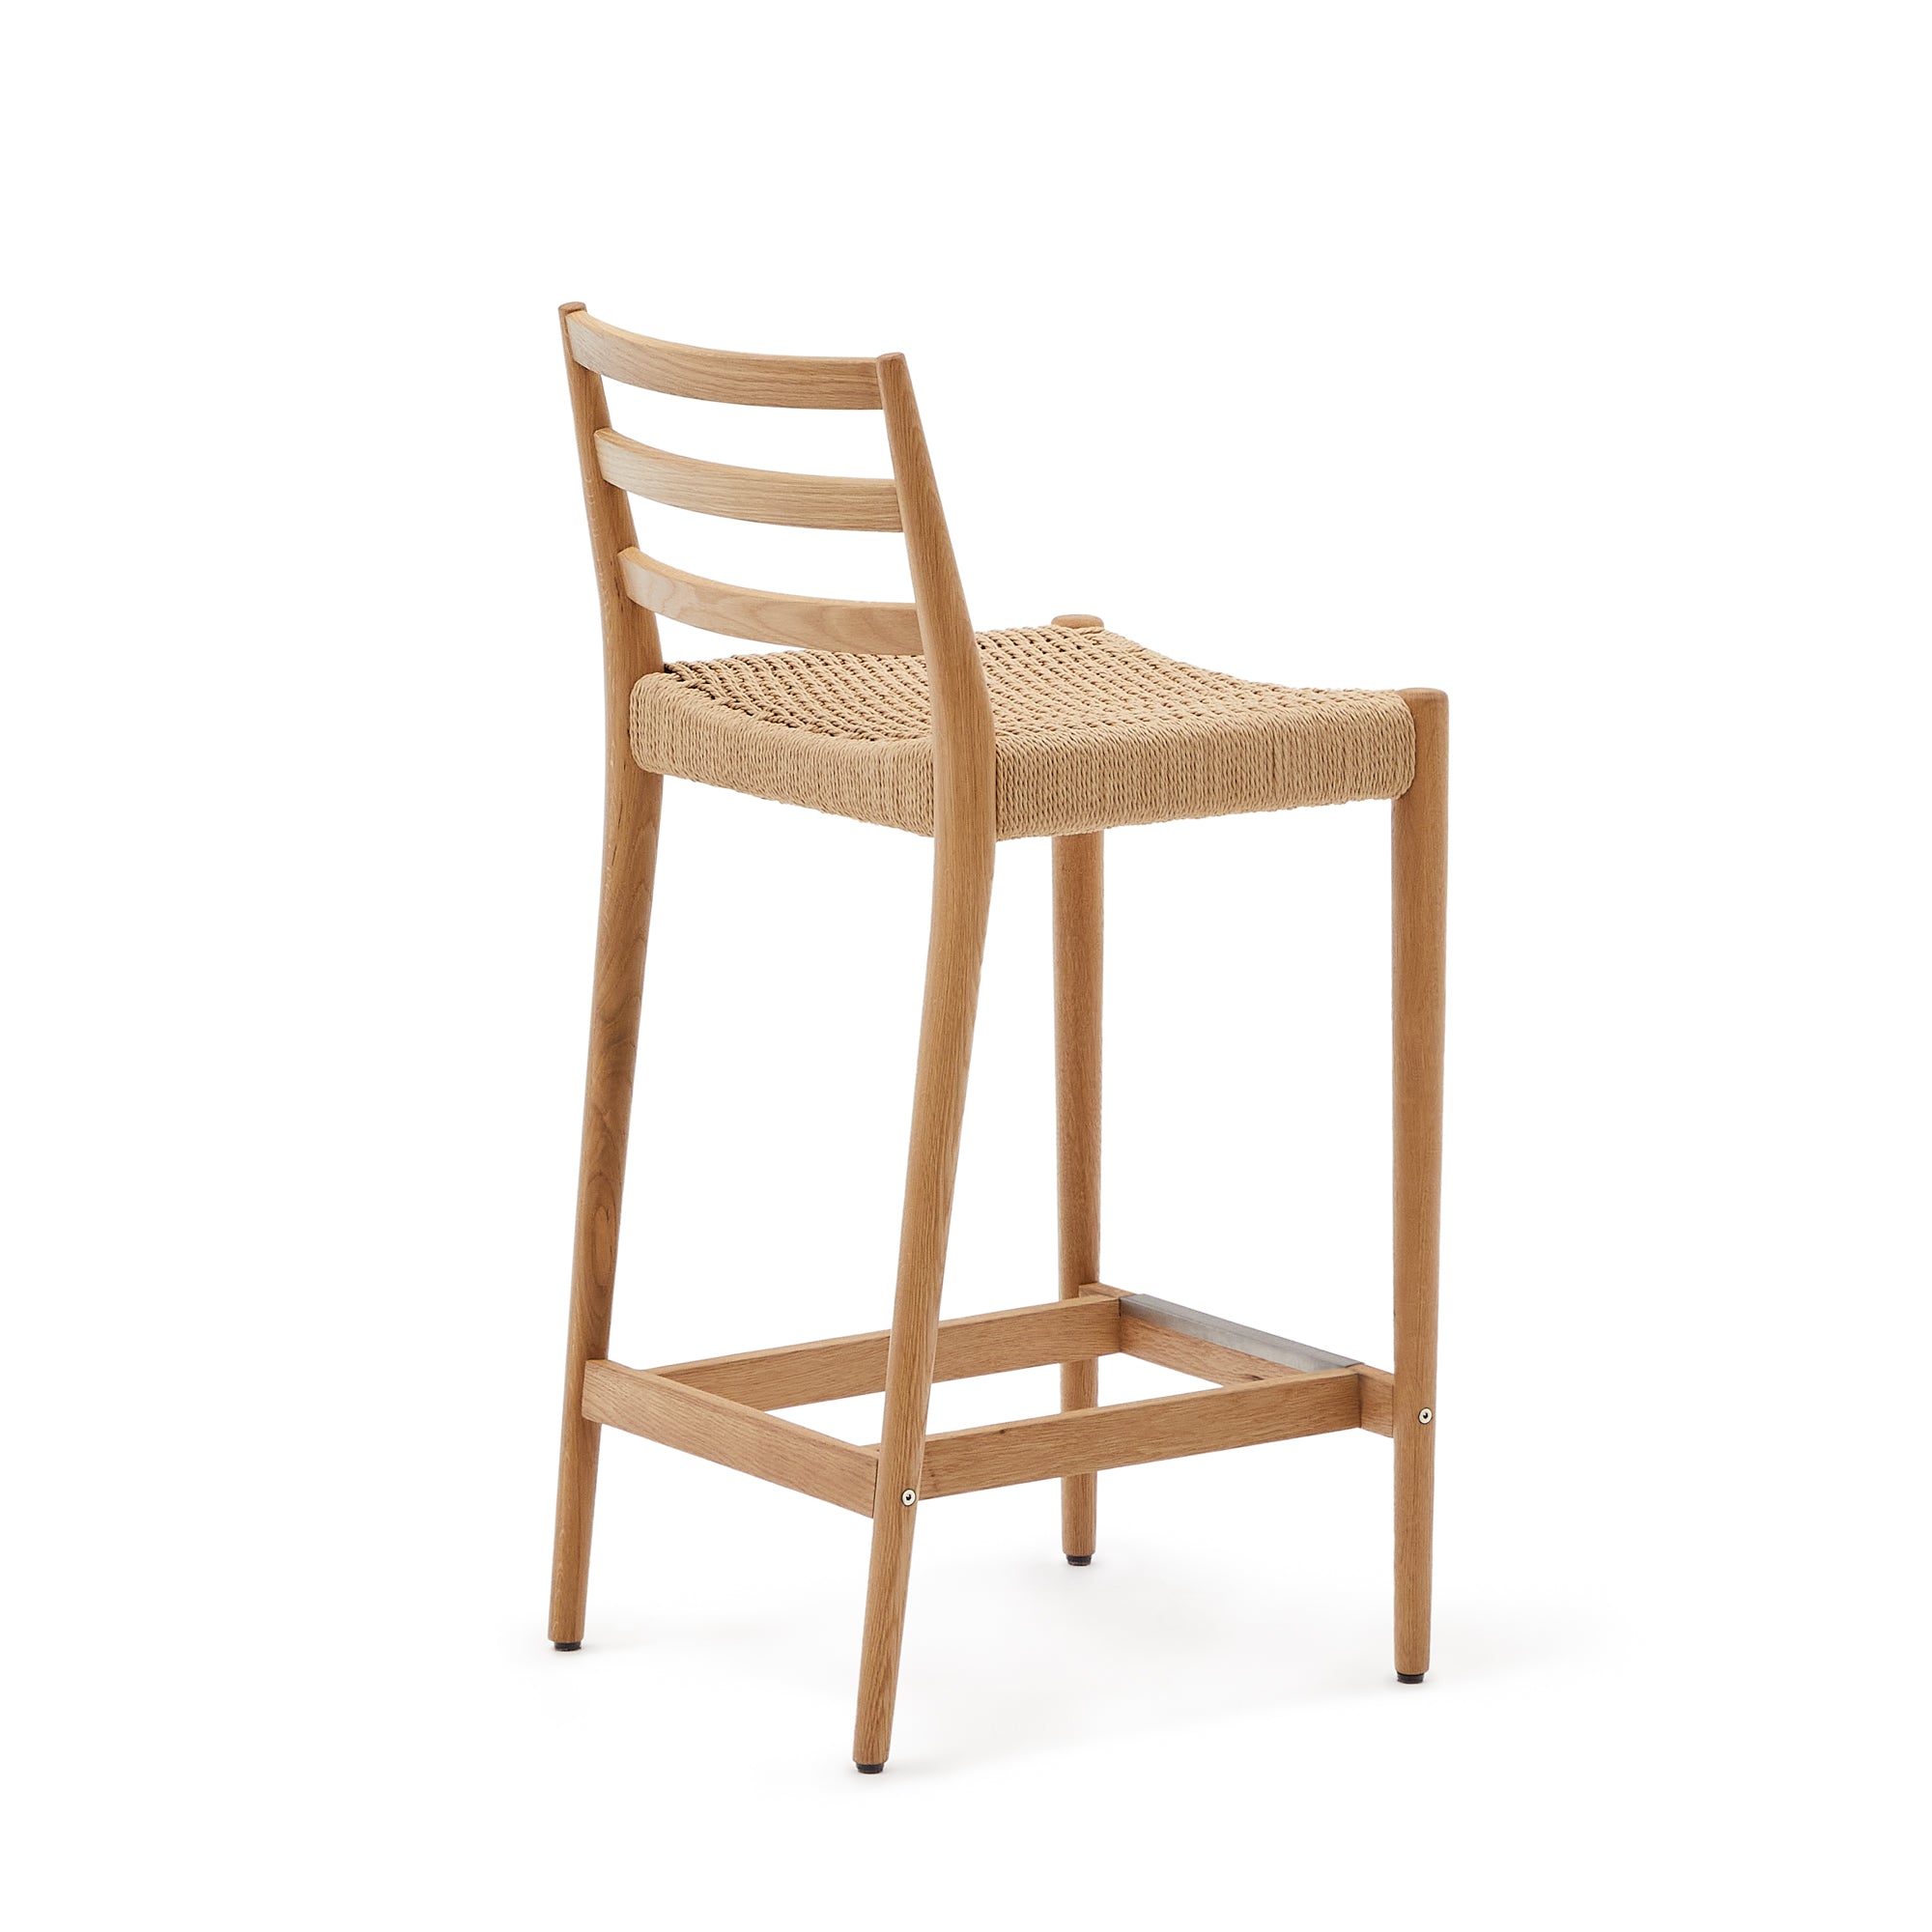 Analy chair with back, solid oak with natural finish and rope seat, 70 cm 100% FSC